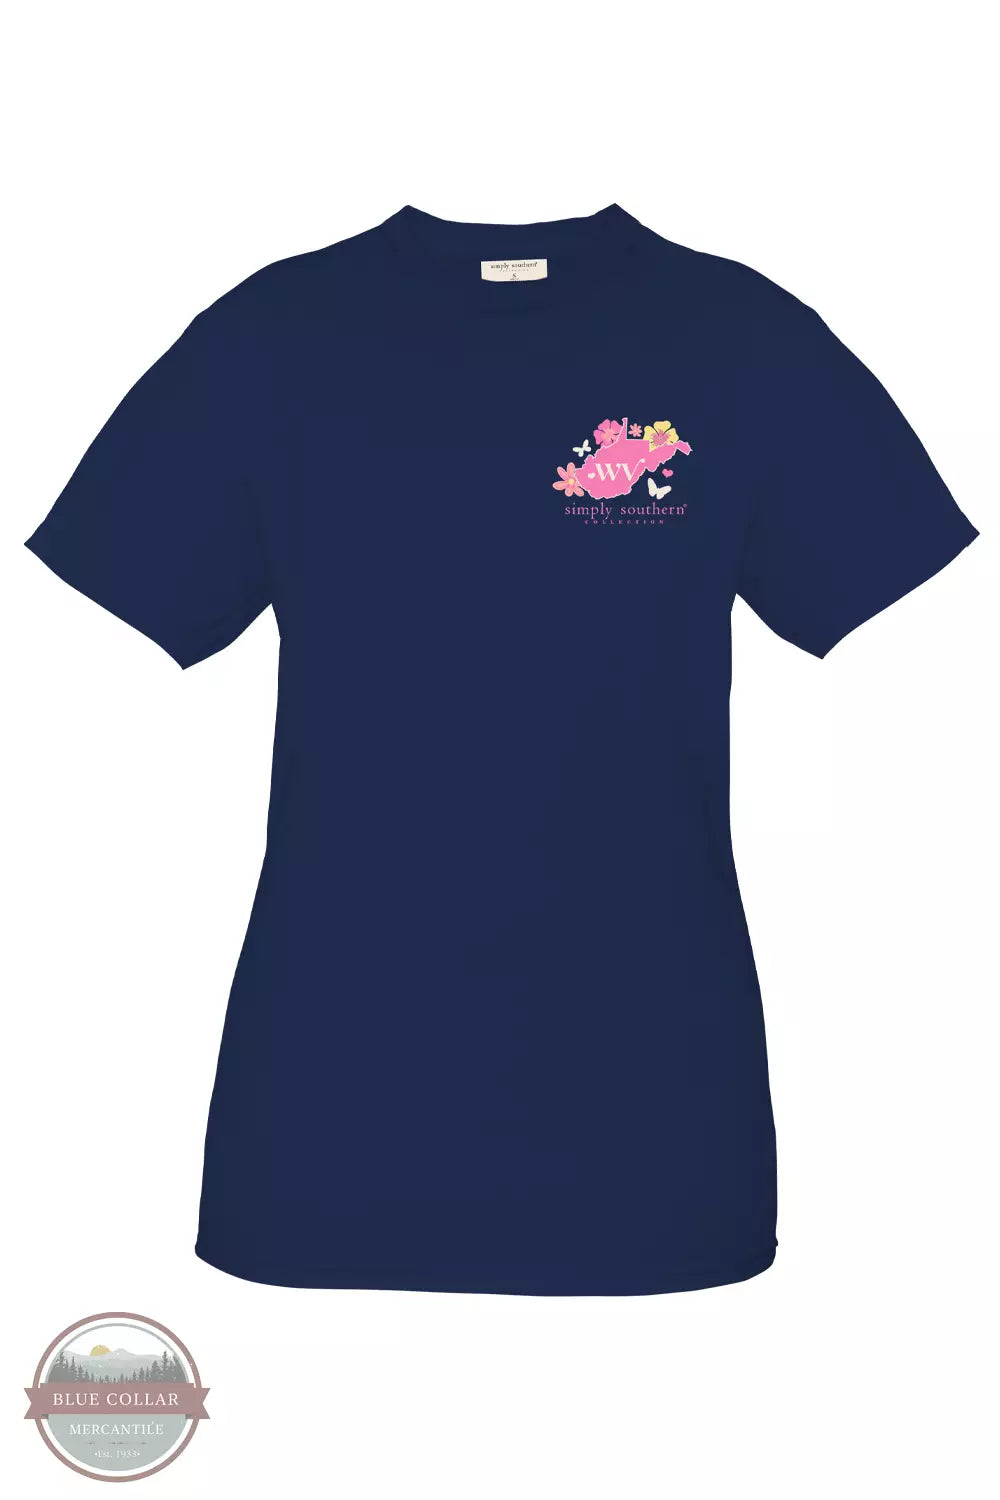 Simply Southern SS-STATE-WV-NAVY West Virginia Floral T-Shirt in Navy Front View